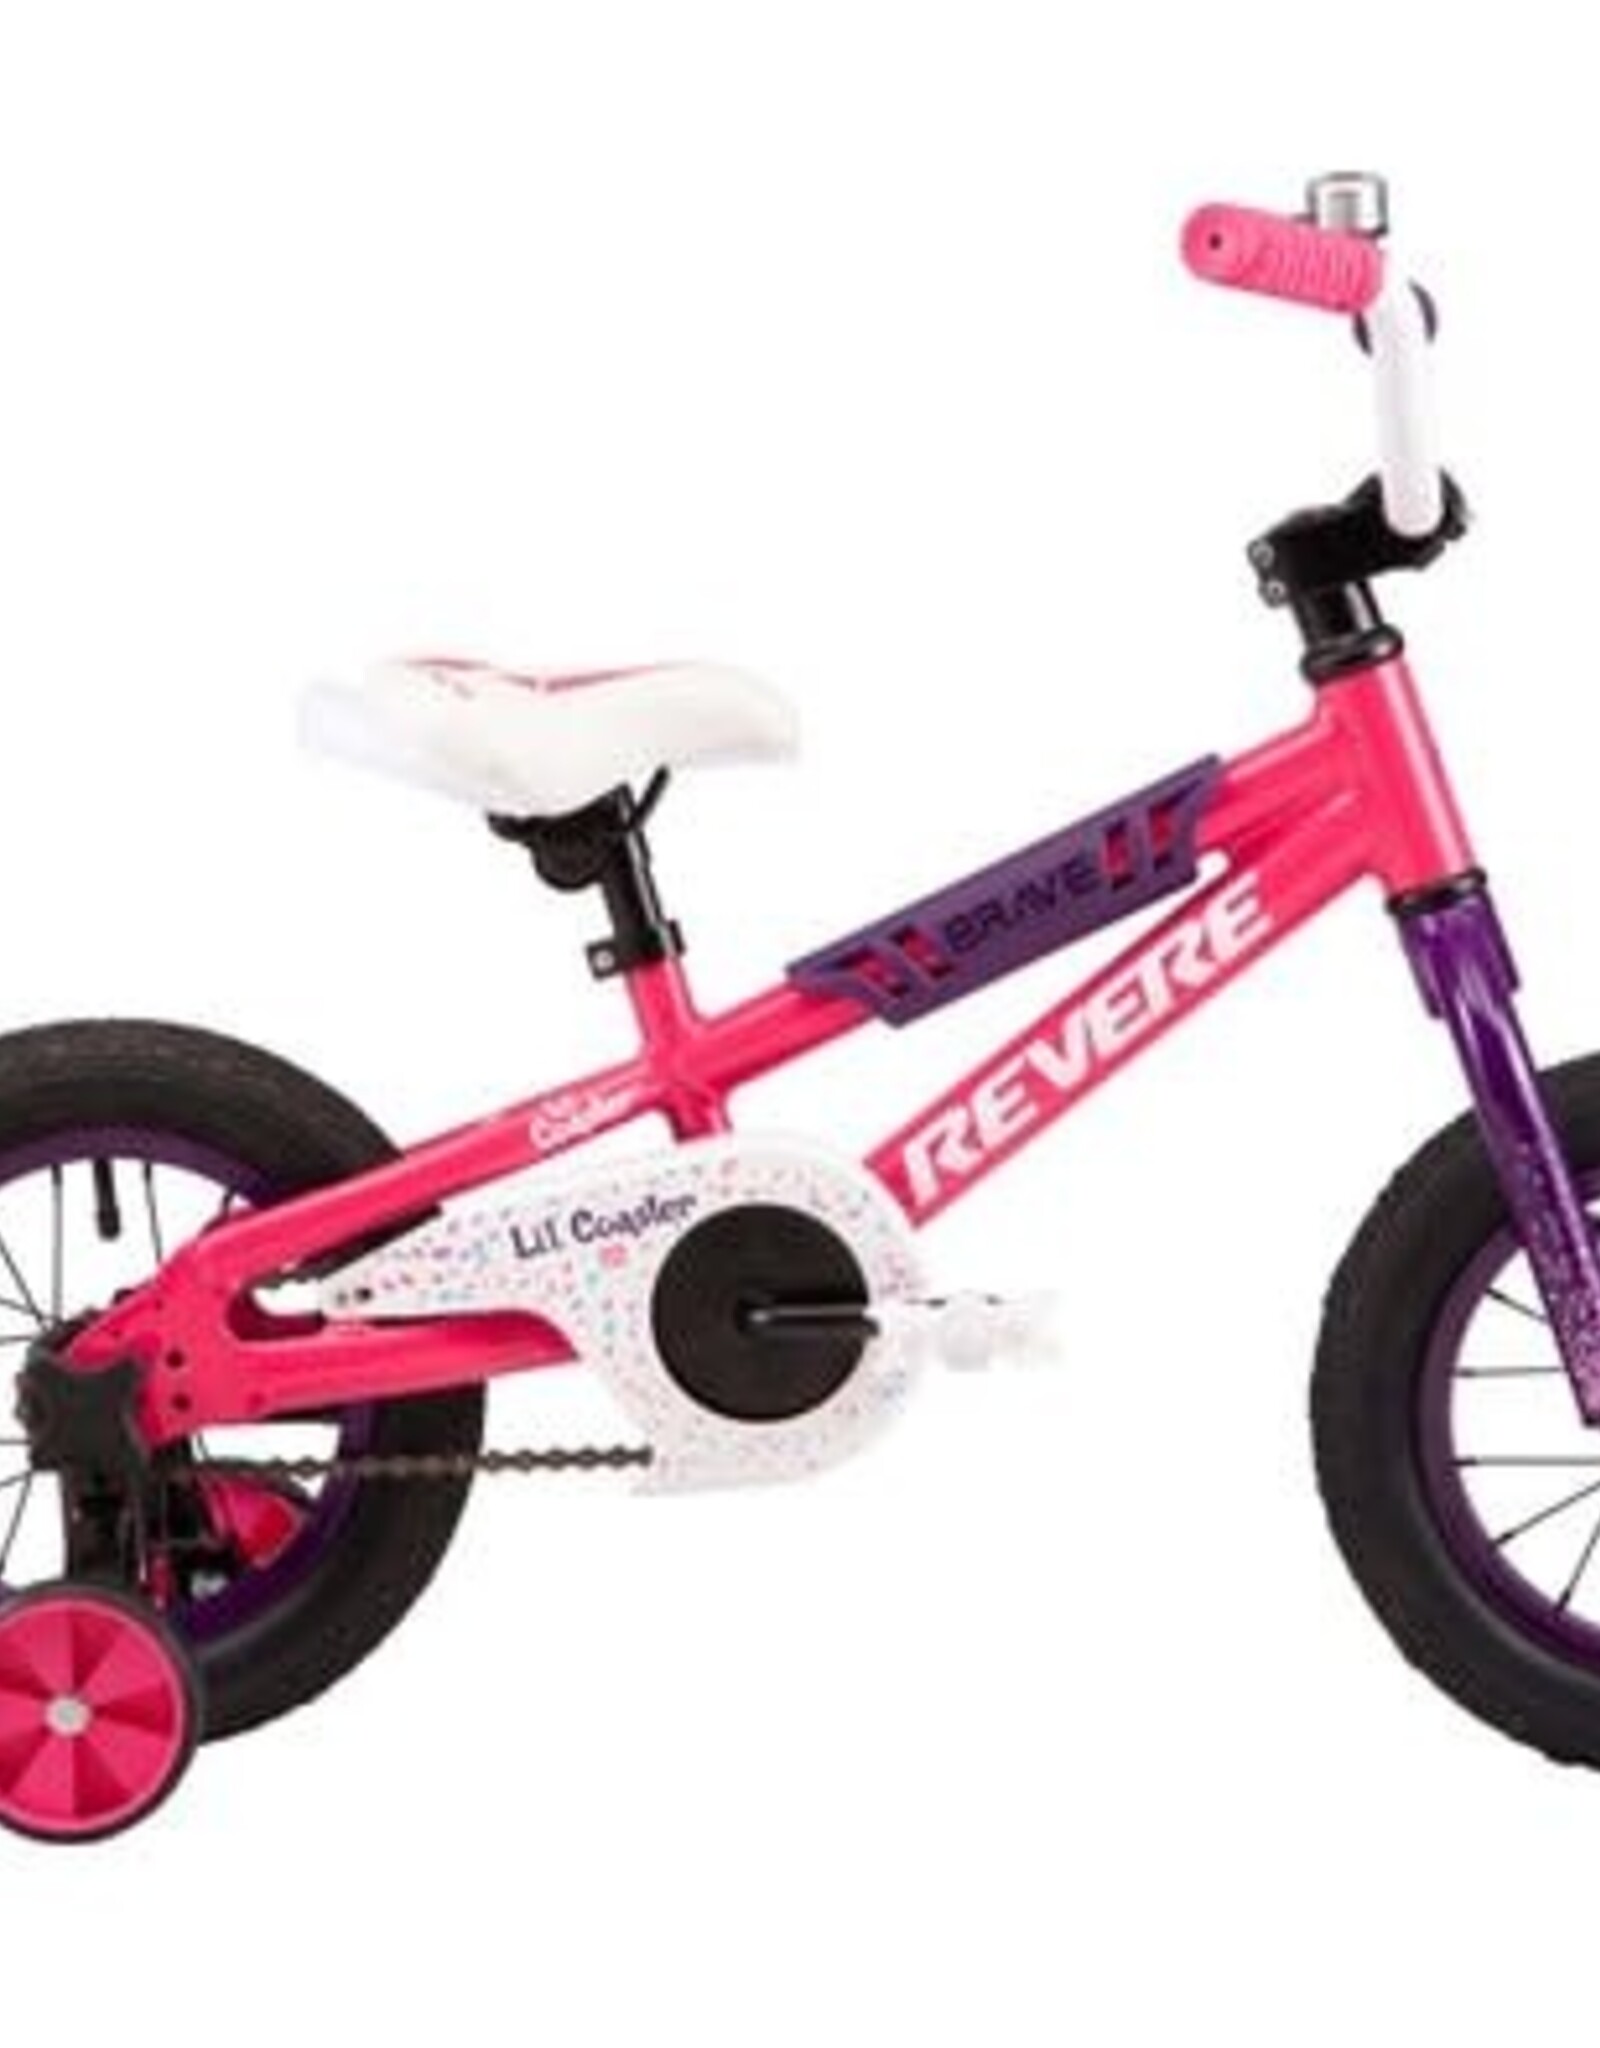 Revere Bicycles Revere Lil Coaster 12 Pink